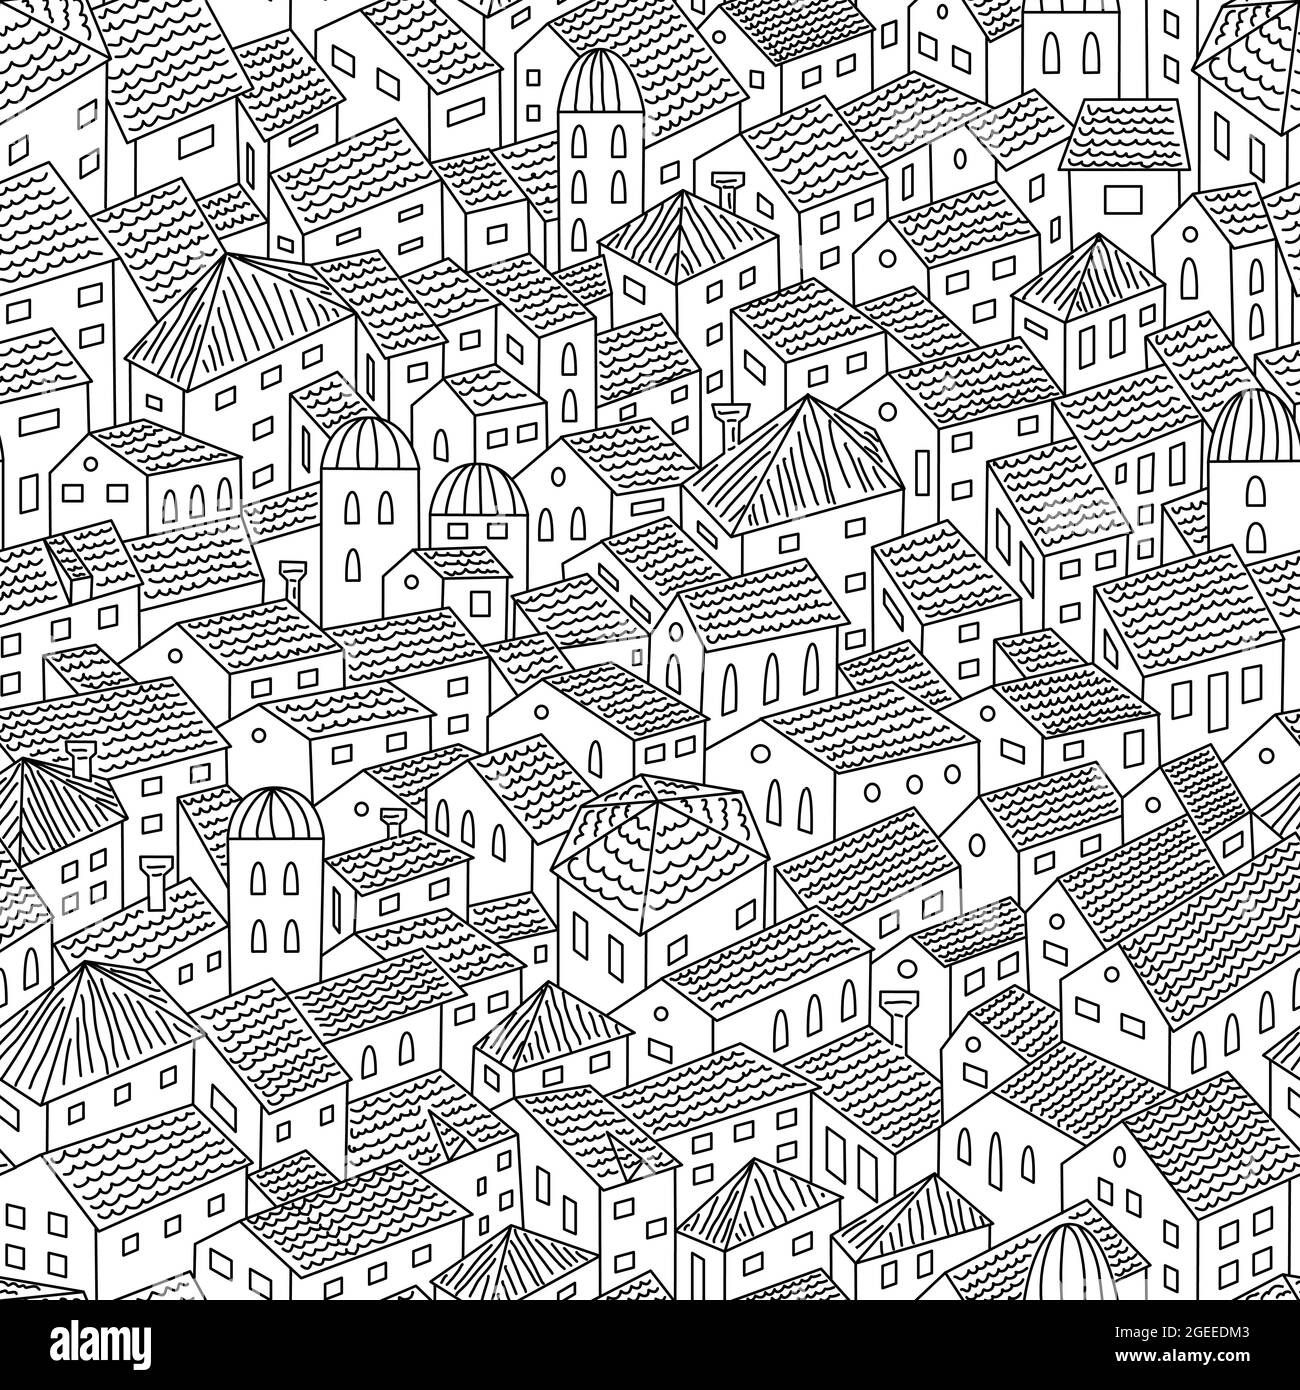 Tiled old city roofs contour top view seamless pattern, doodle style hand drawn old houses and towers of town outline vector illustration Stock Vector